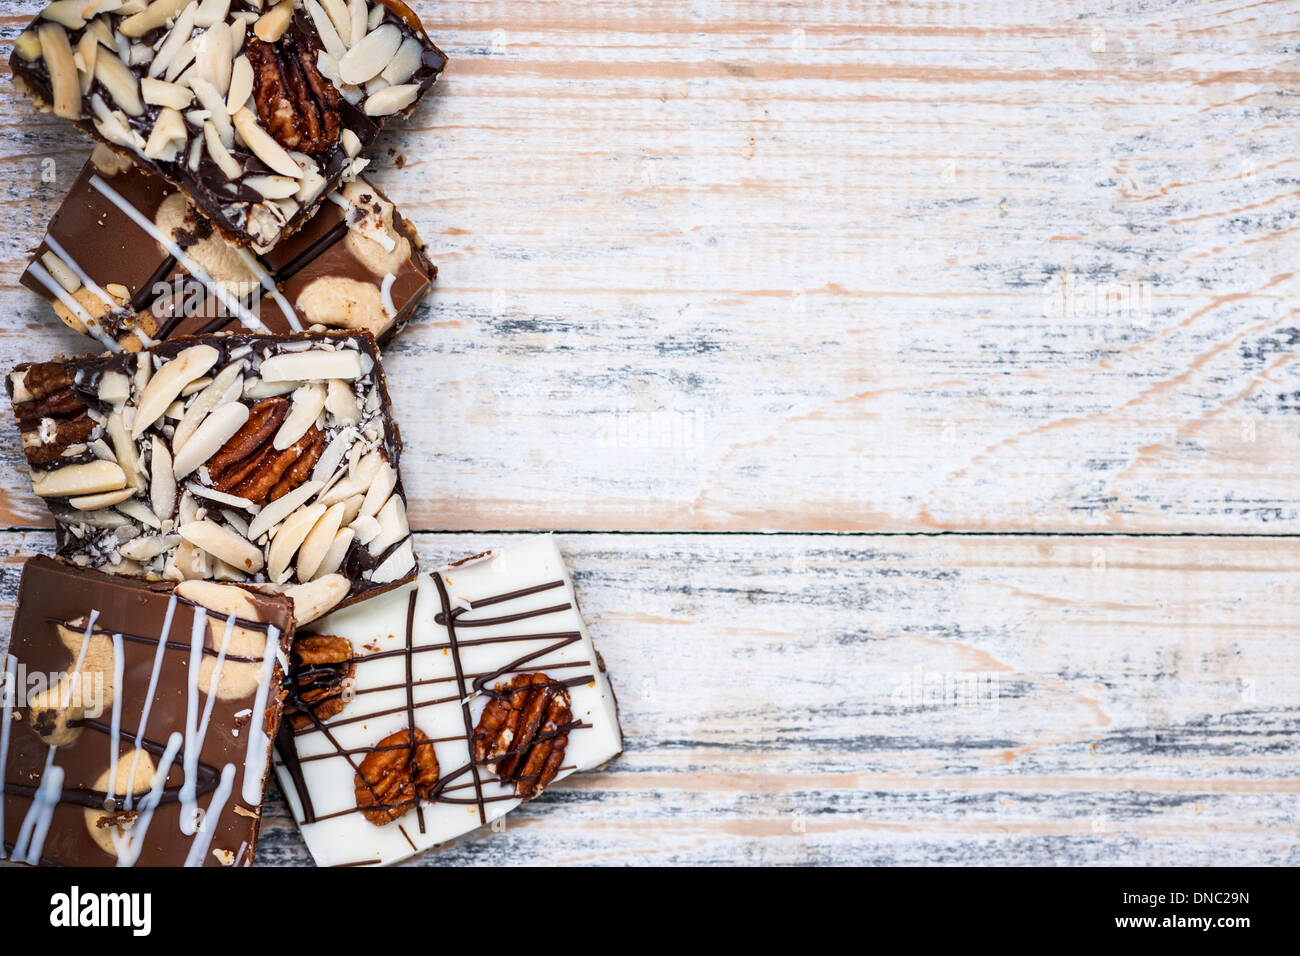 Assorted chocolate caramel bark pieces arranged on wooden background from above with copy space Stock Photo